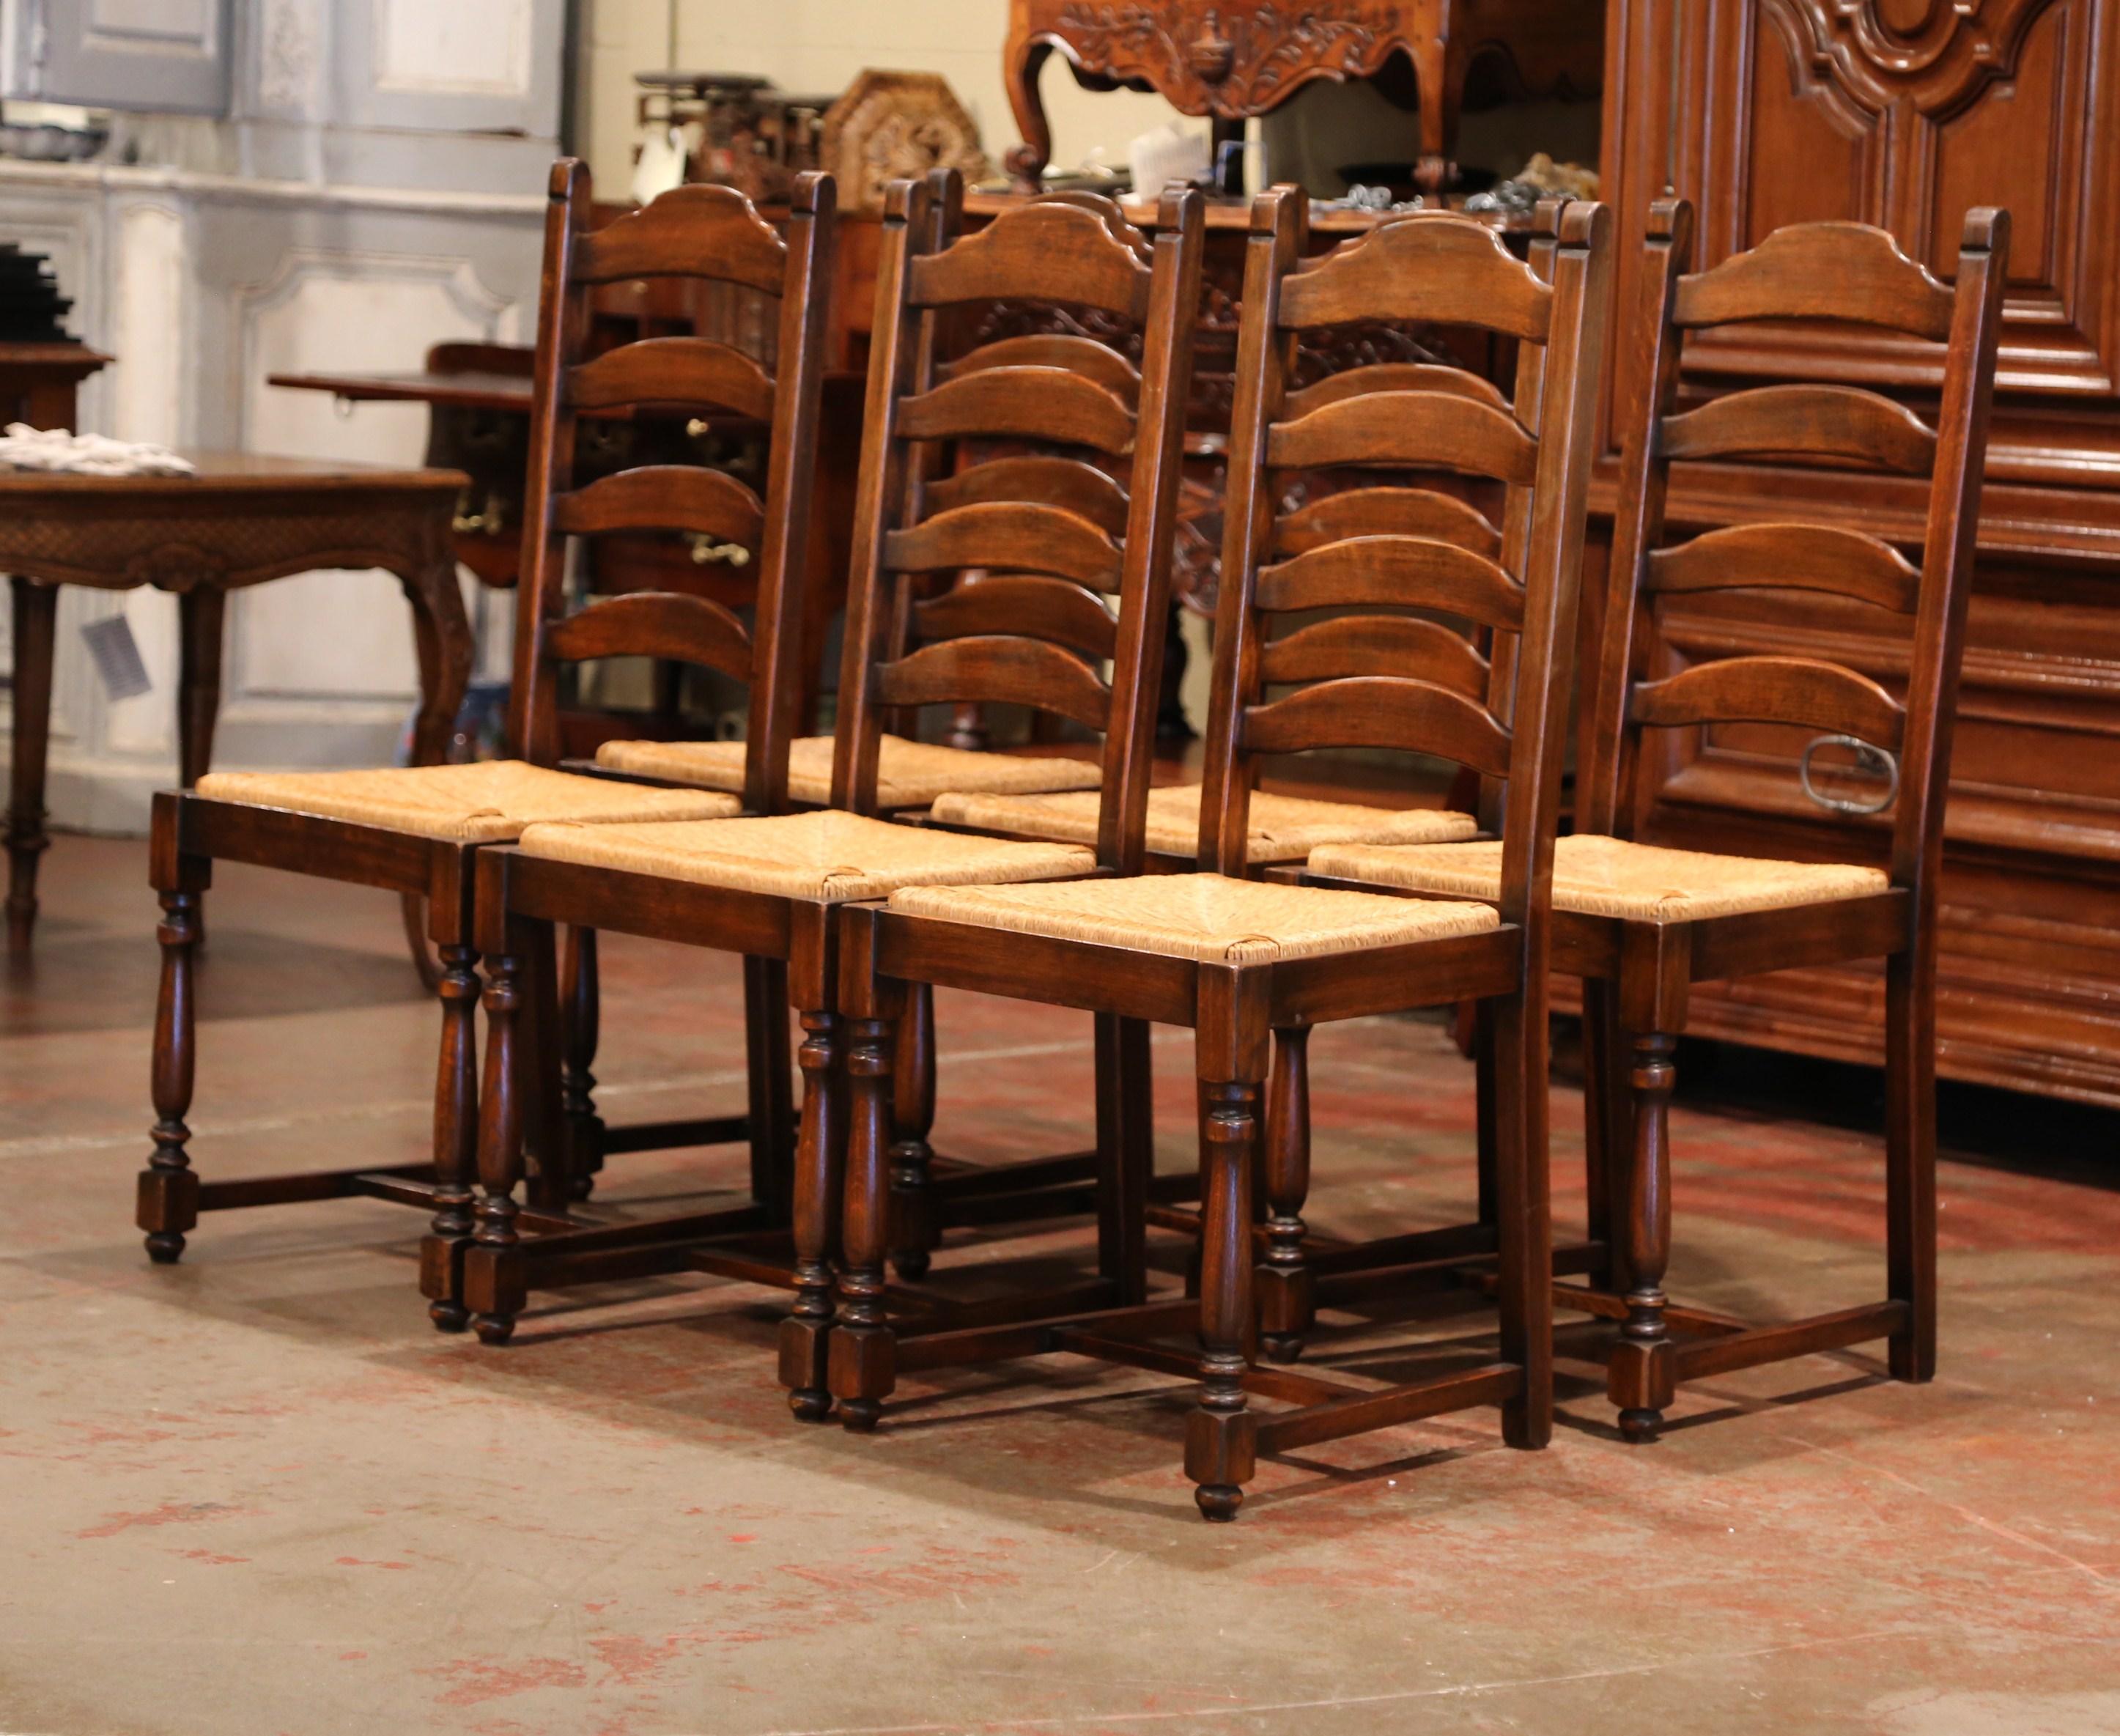 This elegant set of country chairs was crafted in France, circa 1990. Carved from solid oak, each chair has a tall back with four ladders across and two top finials. The seats have a woven rush surface, four carved, turned legs, and a pitched back,